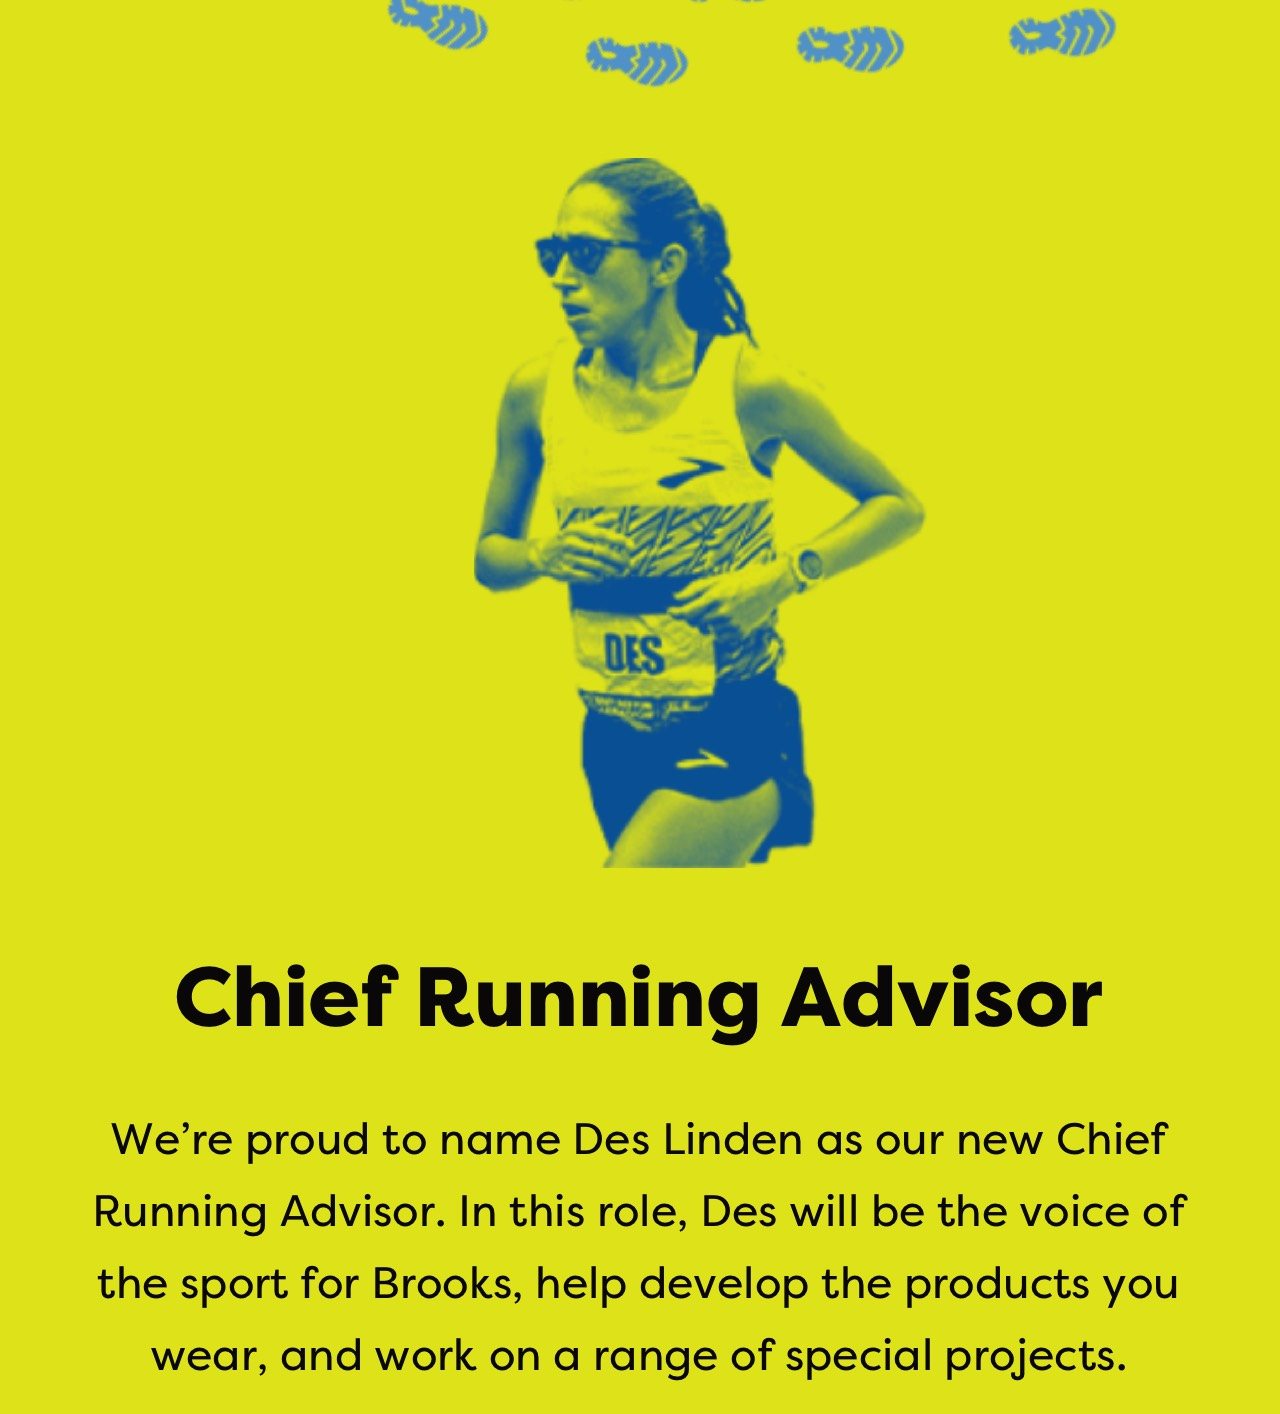 Chief Running Advisor | We're proud to name Des Linden as our new Chief Running Advisor. In this role, Des will be the voice of the sport for Brooks, help develop the products you wear, and work on a range of special projects.